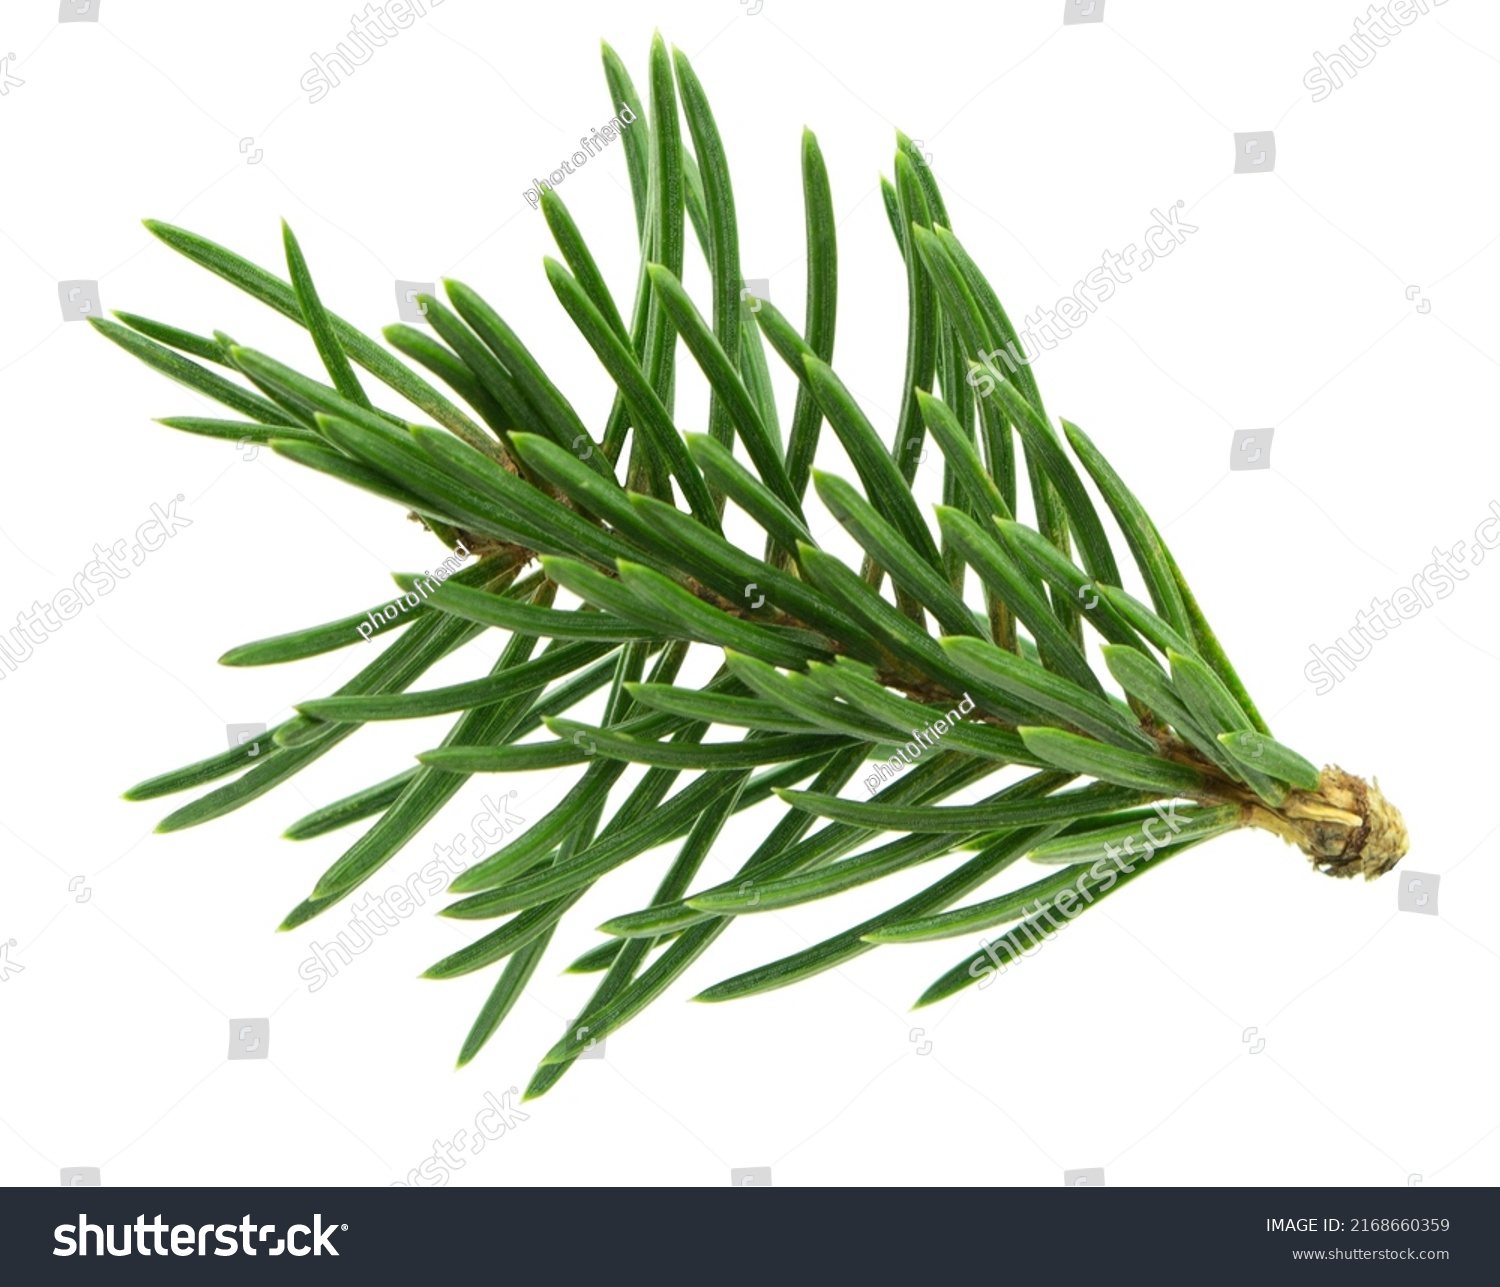 pine branch tree isolated on white background. element for bouquets. Branches greenery elements of plant on white background. Merry christmas, happy new year. #2168660359